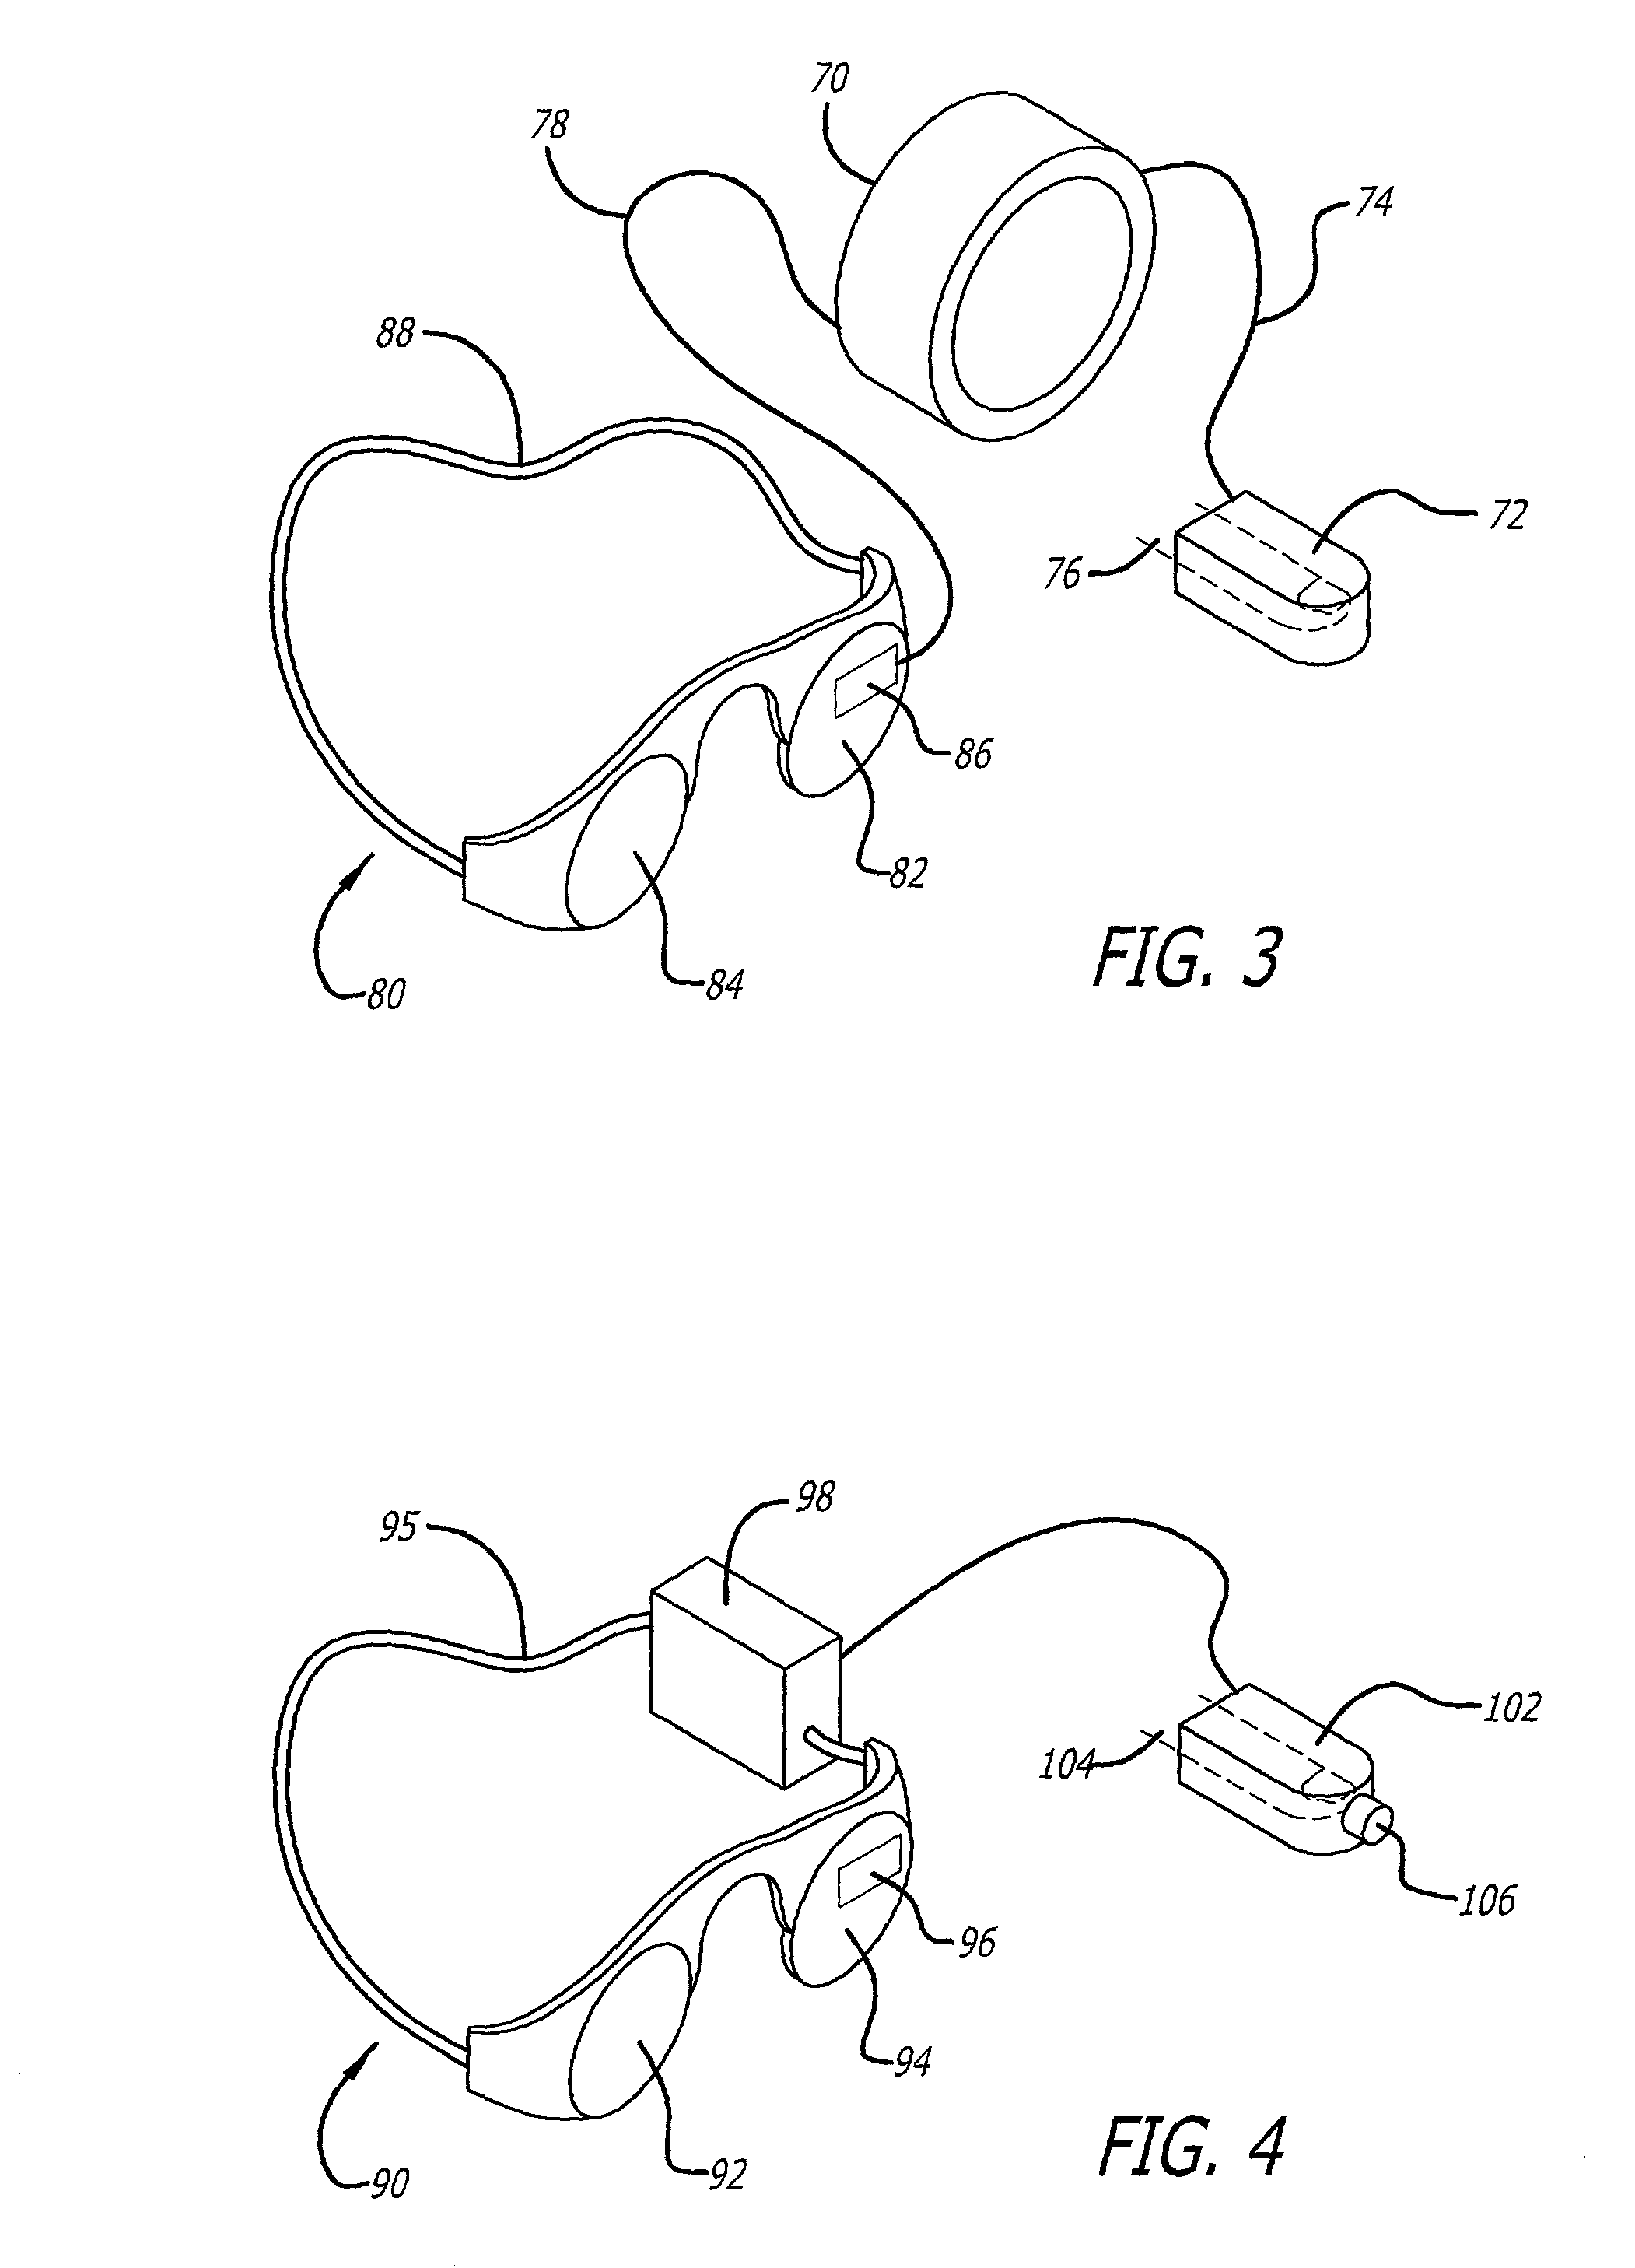 Data display system and method for an object traversing a circuit